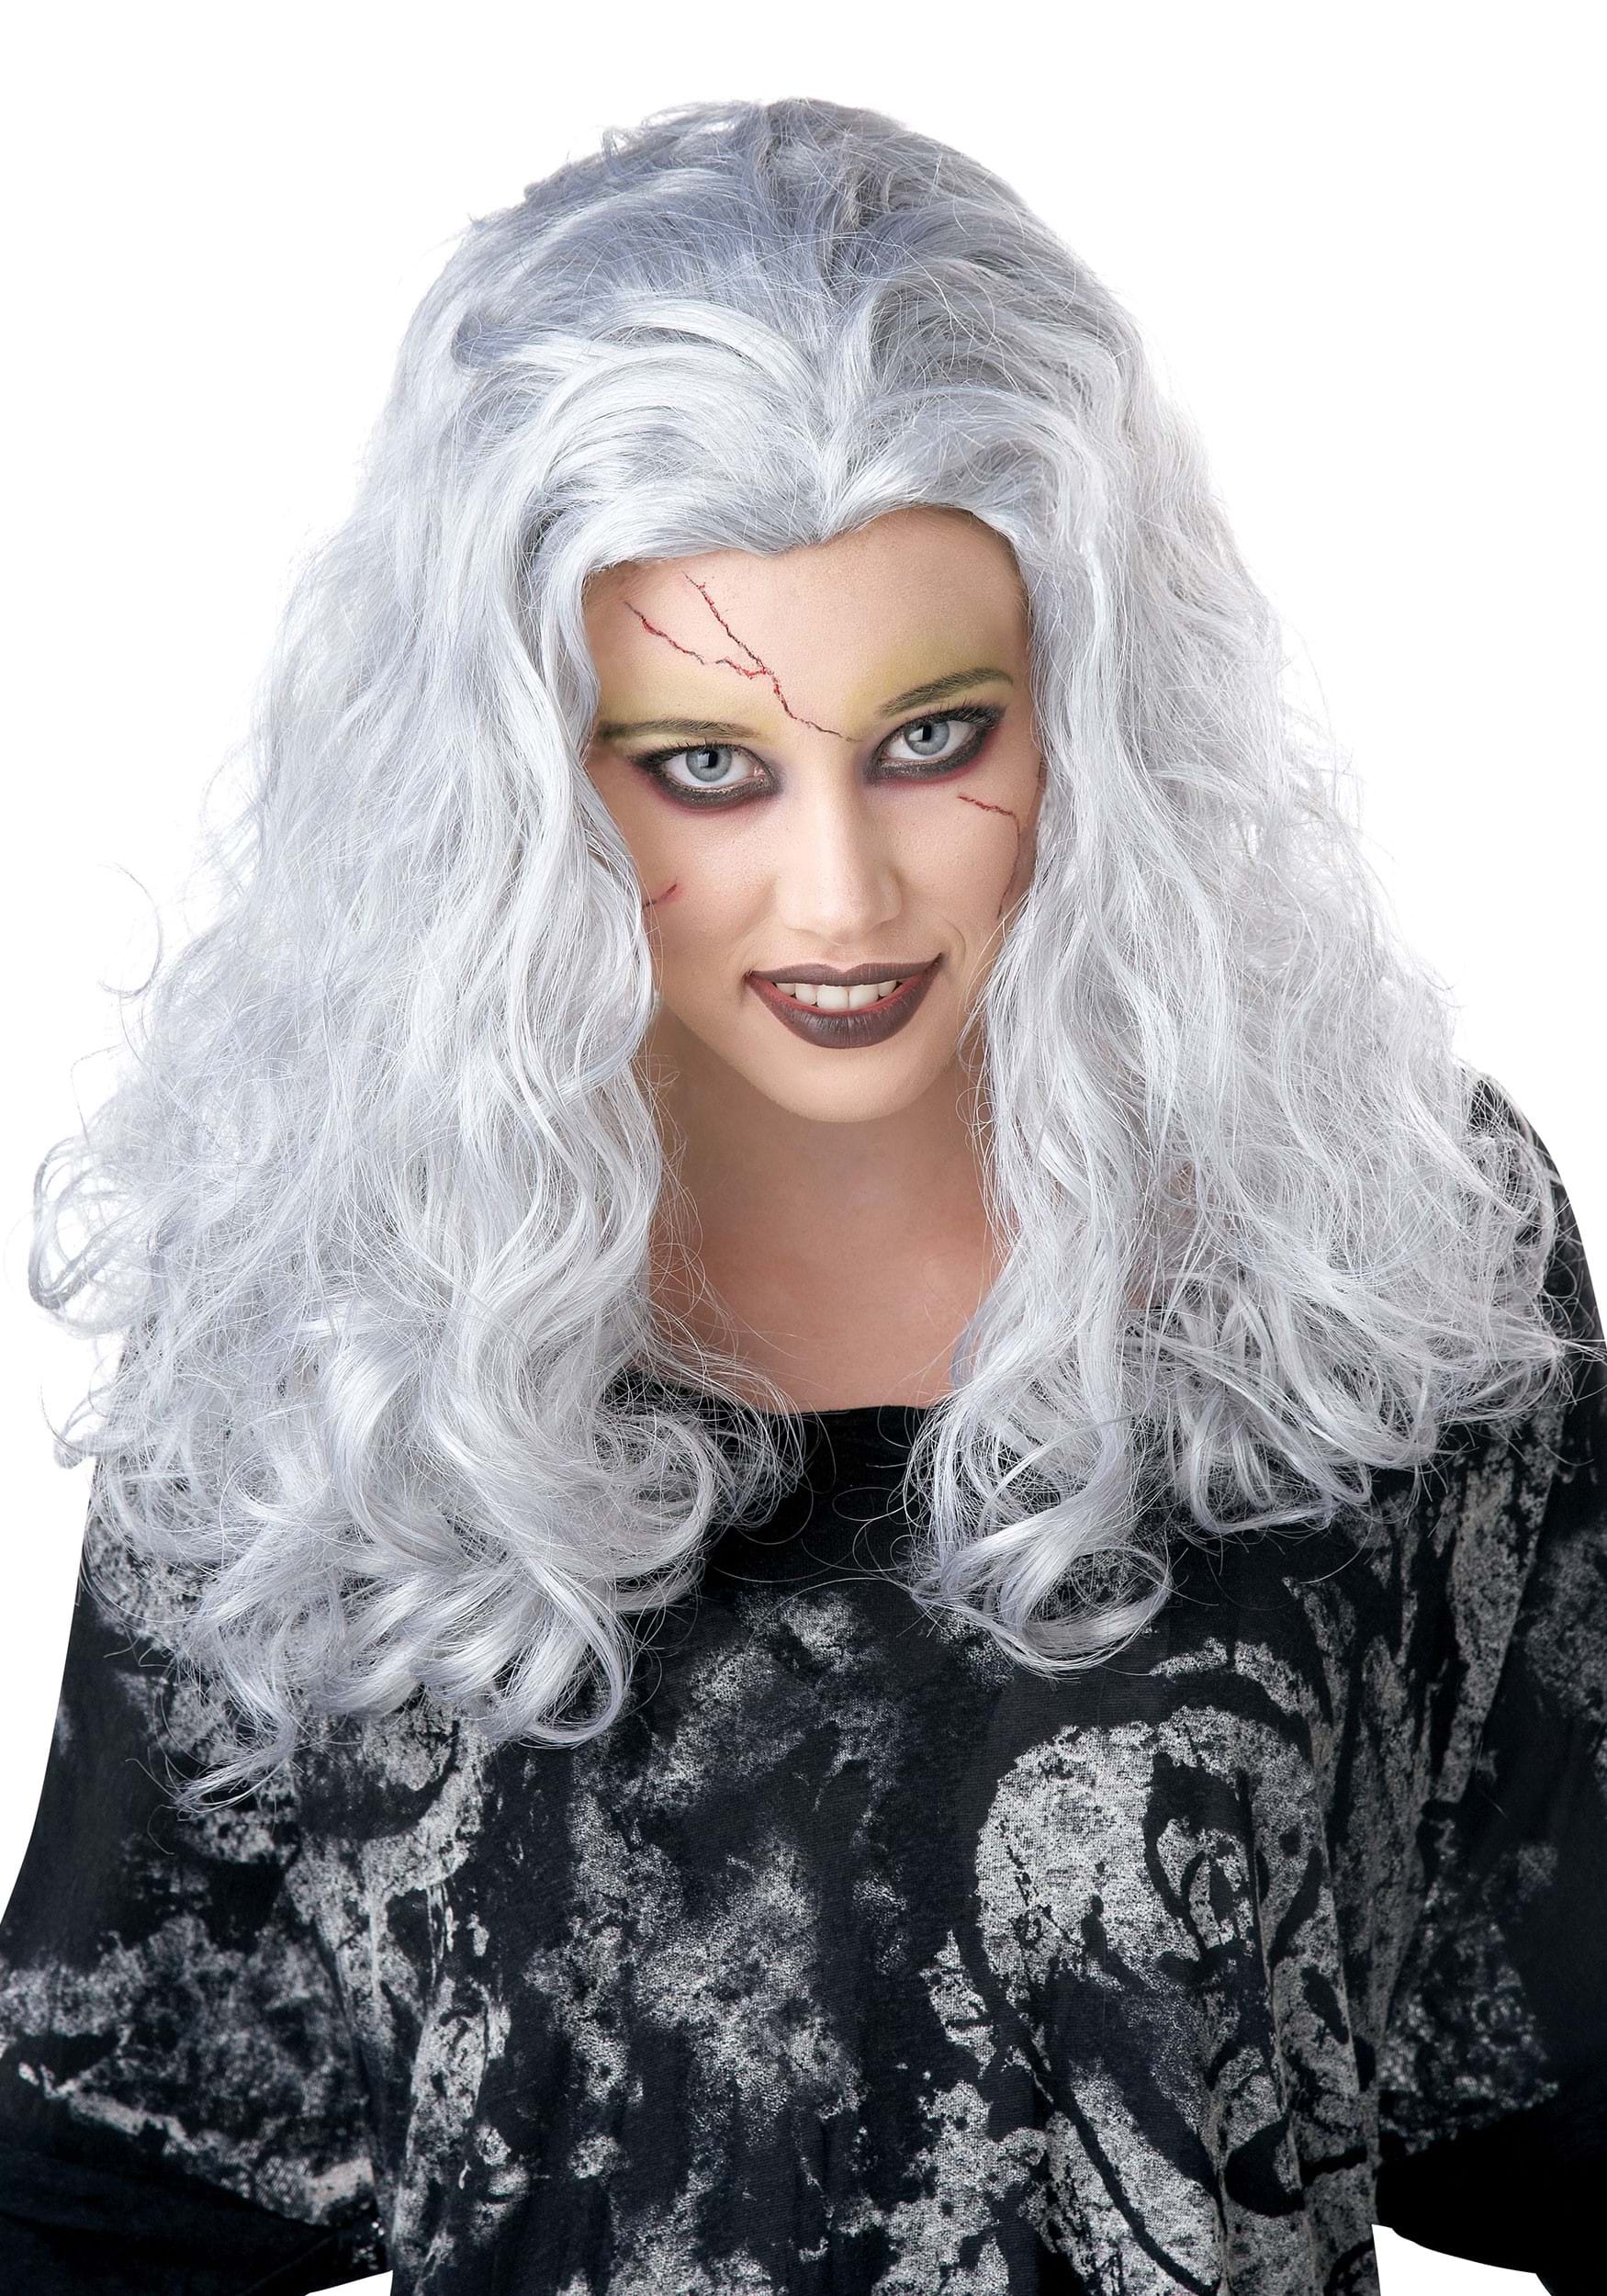 Women’s Ghostly White Wig